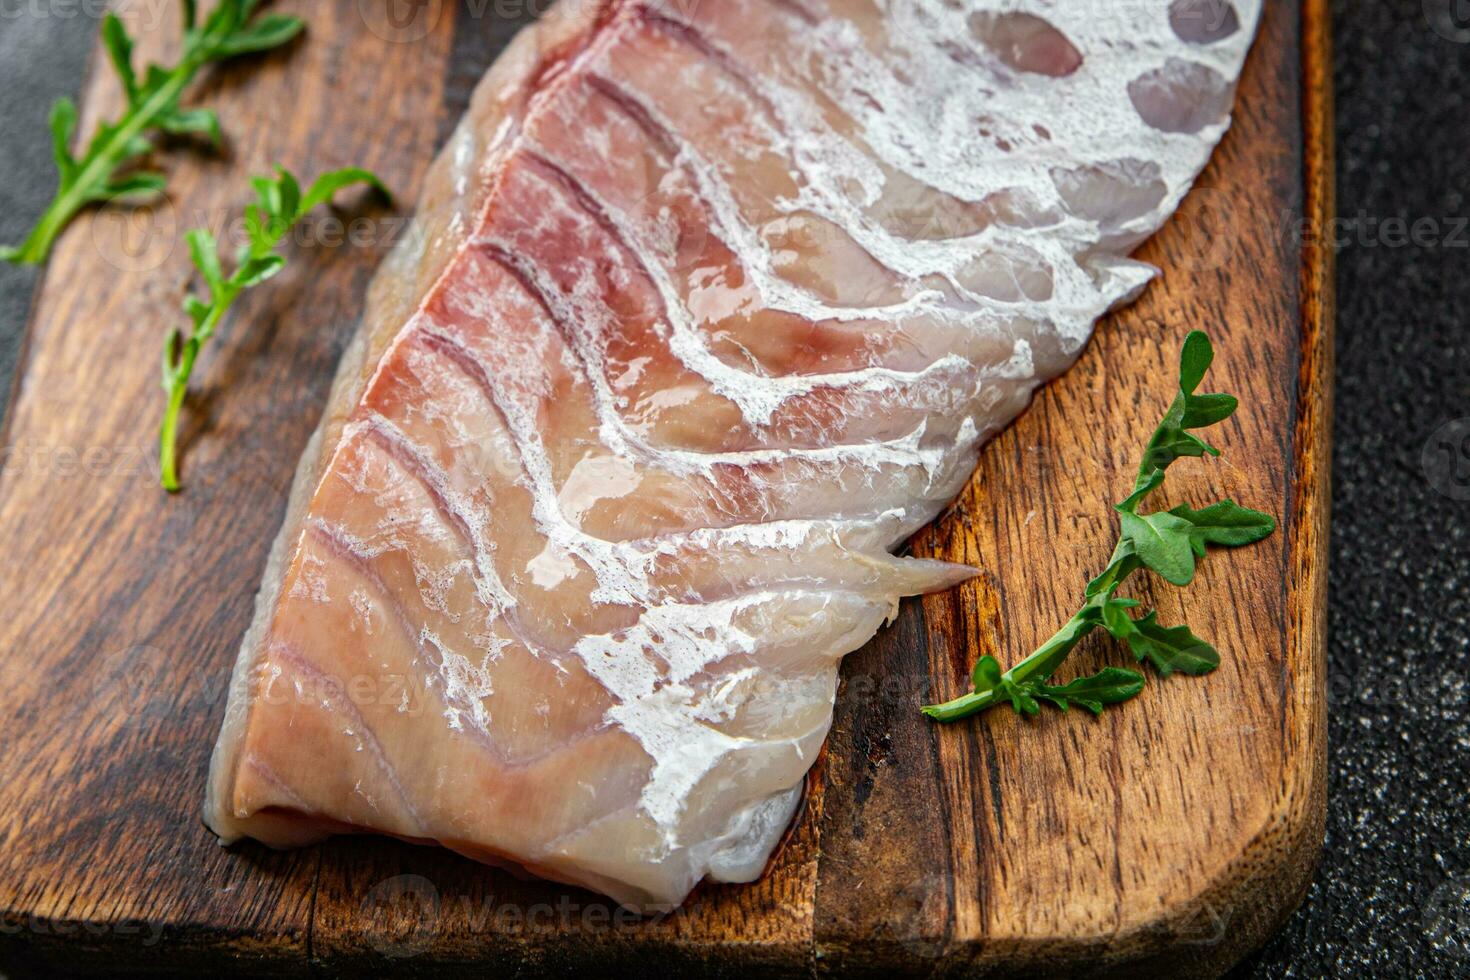 fillet of white fish without skin and bones fresh seafood healthy meal food snack on the table copy space food background rustic top view pescatarian diet photo